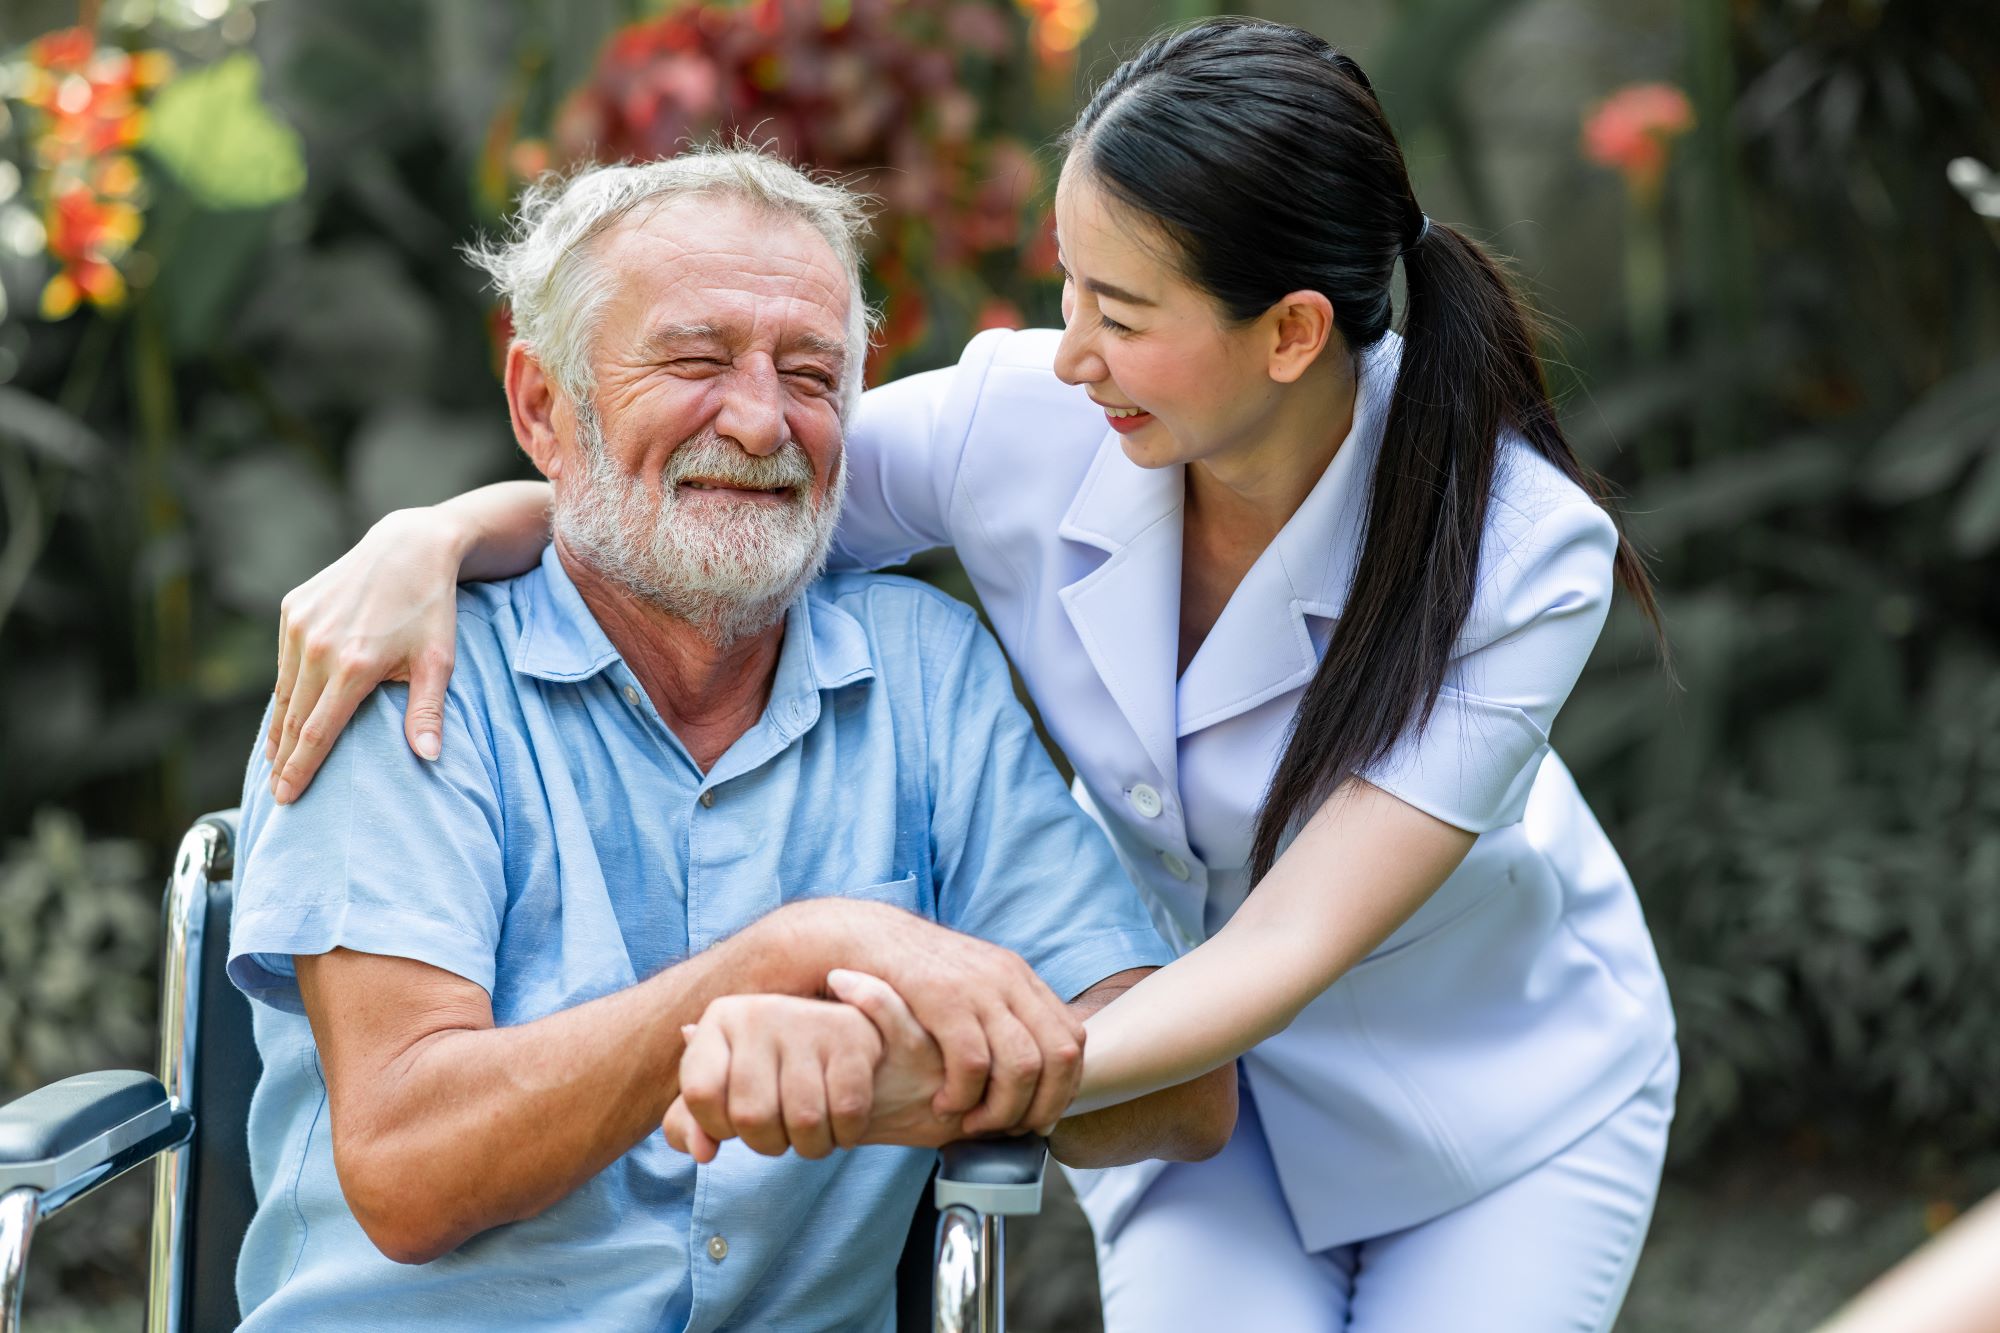 3 Nursing Home Safety Features You Shouldn't Overlook